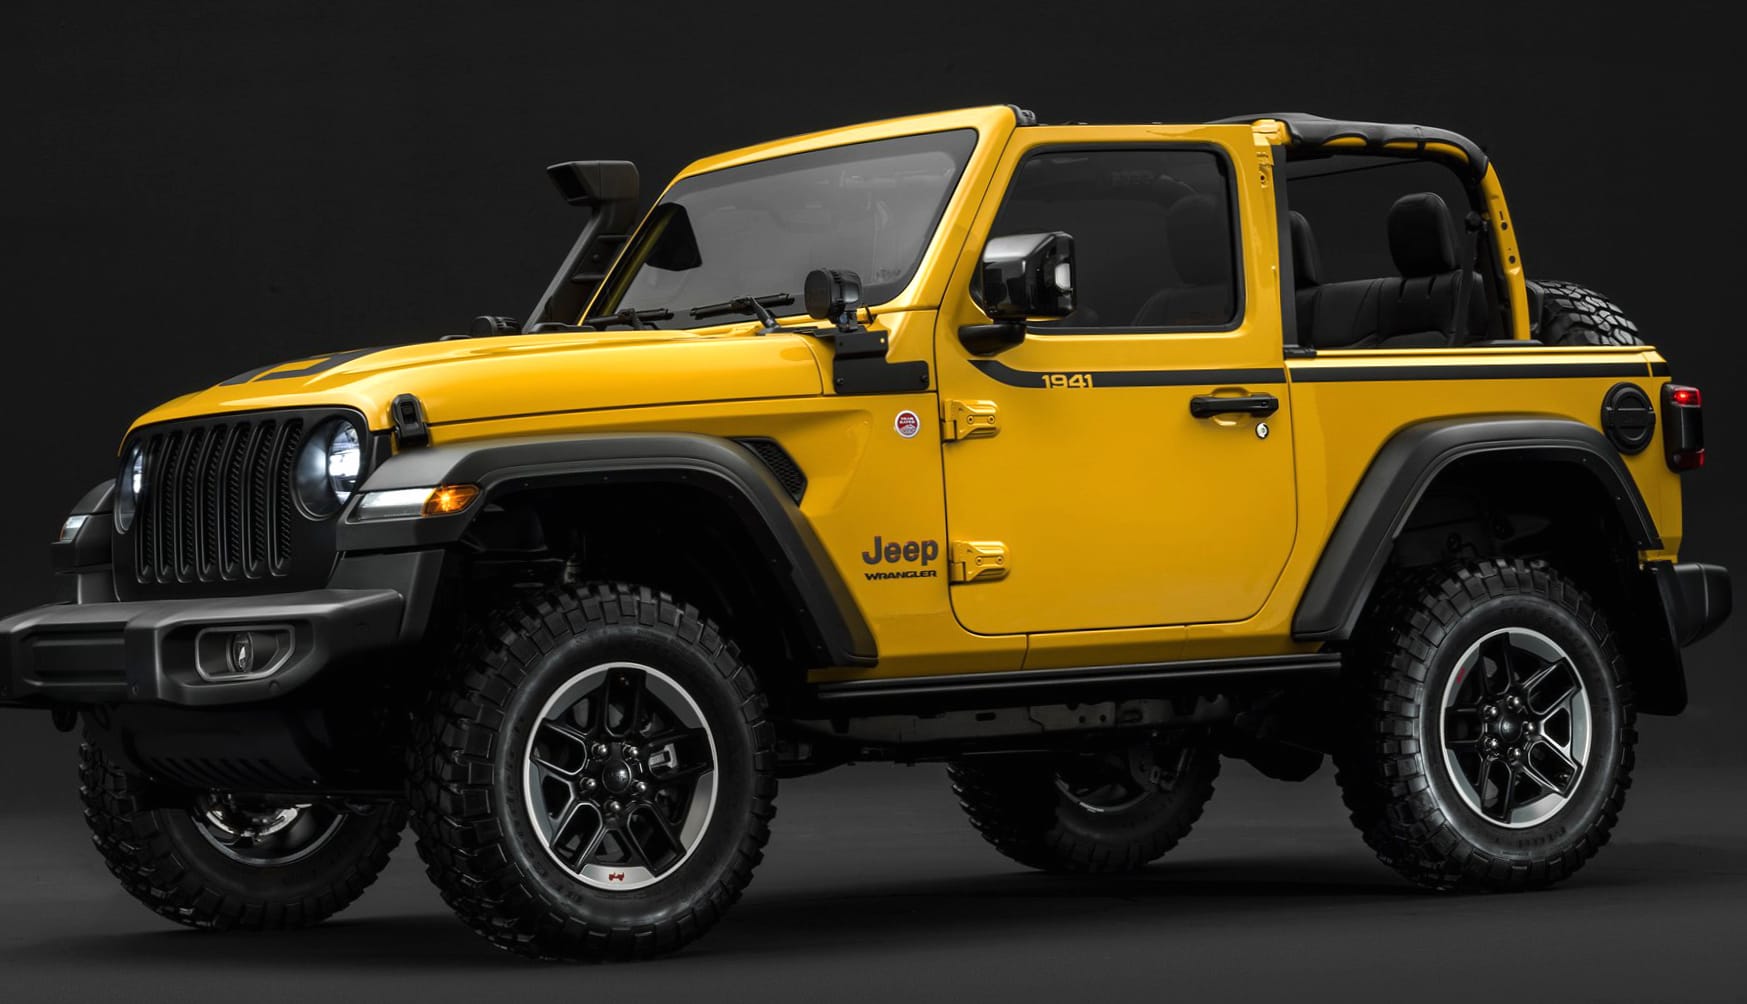 Jeep Wrangler Rubicon 1941 by Mopar wallpapers HD quality